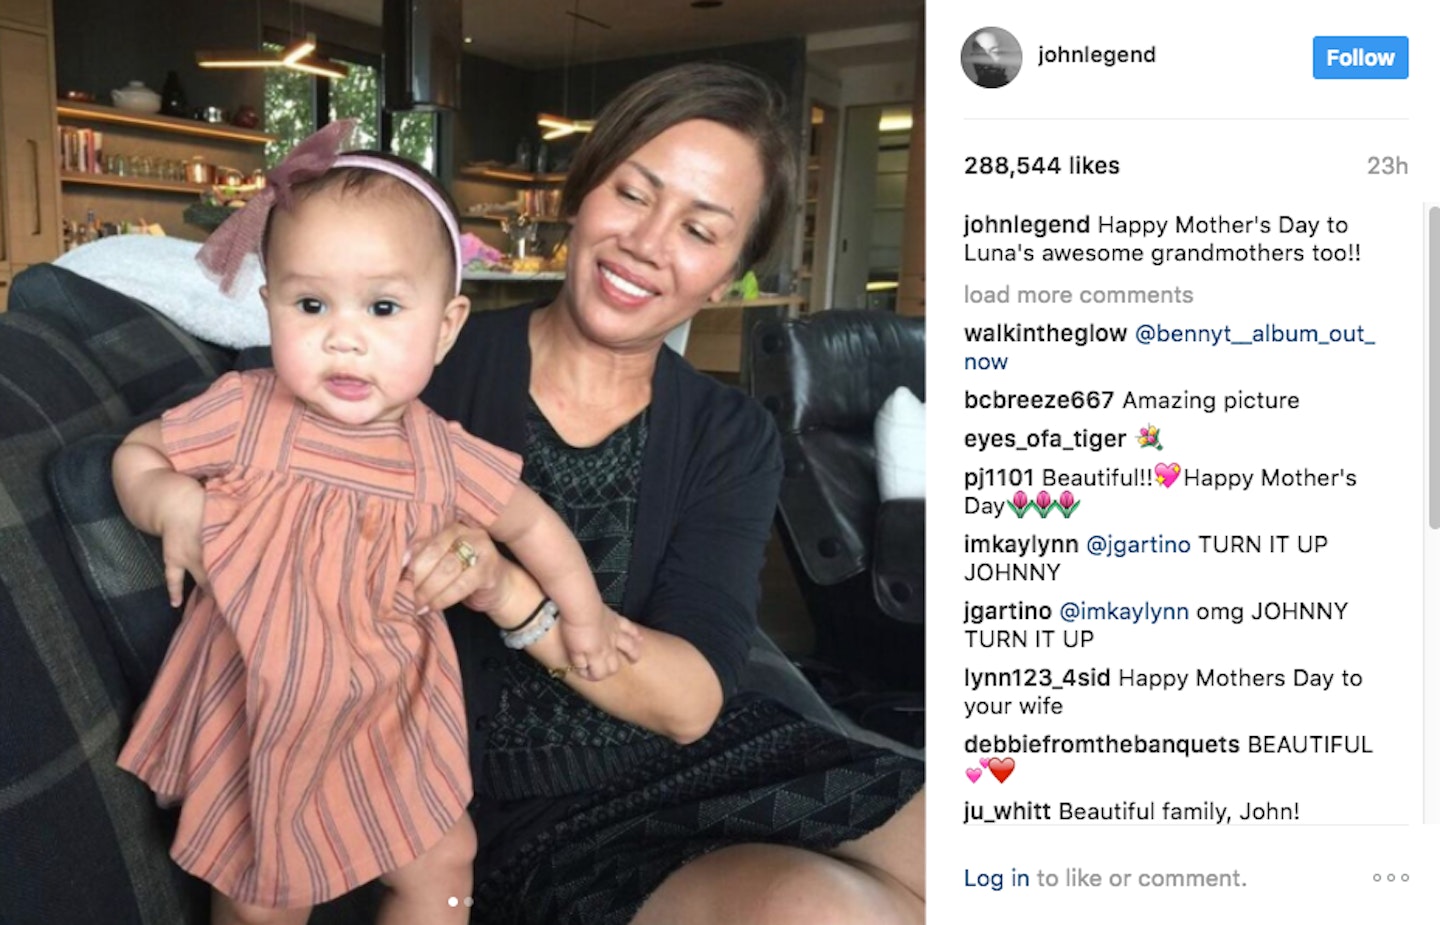 John Legend's Mother's Day message to his mother on Instagram